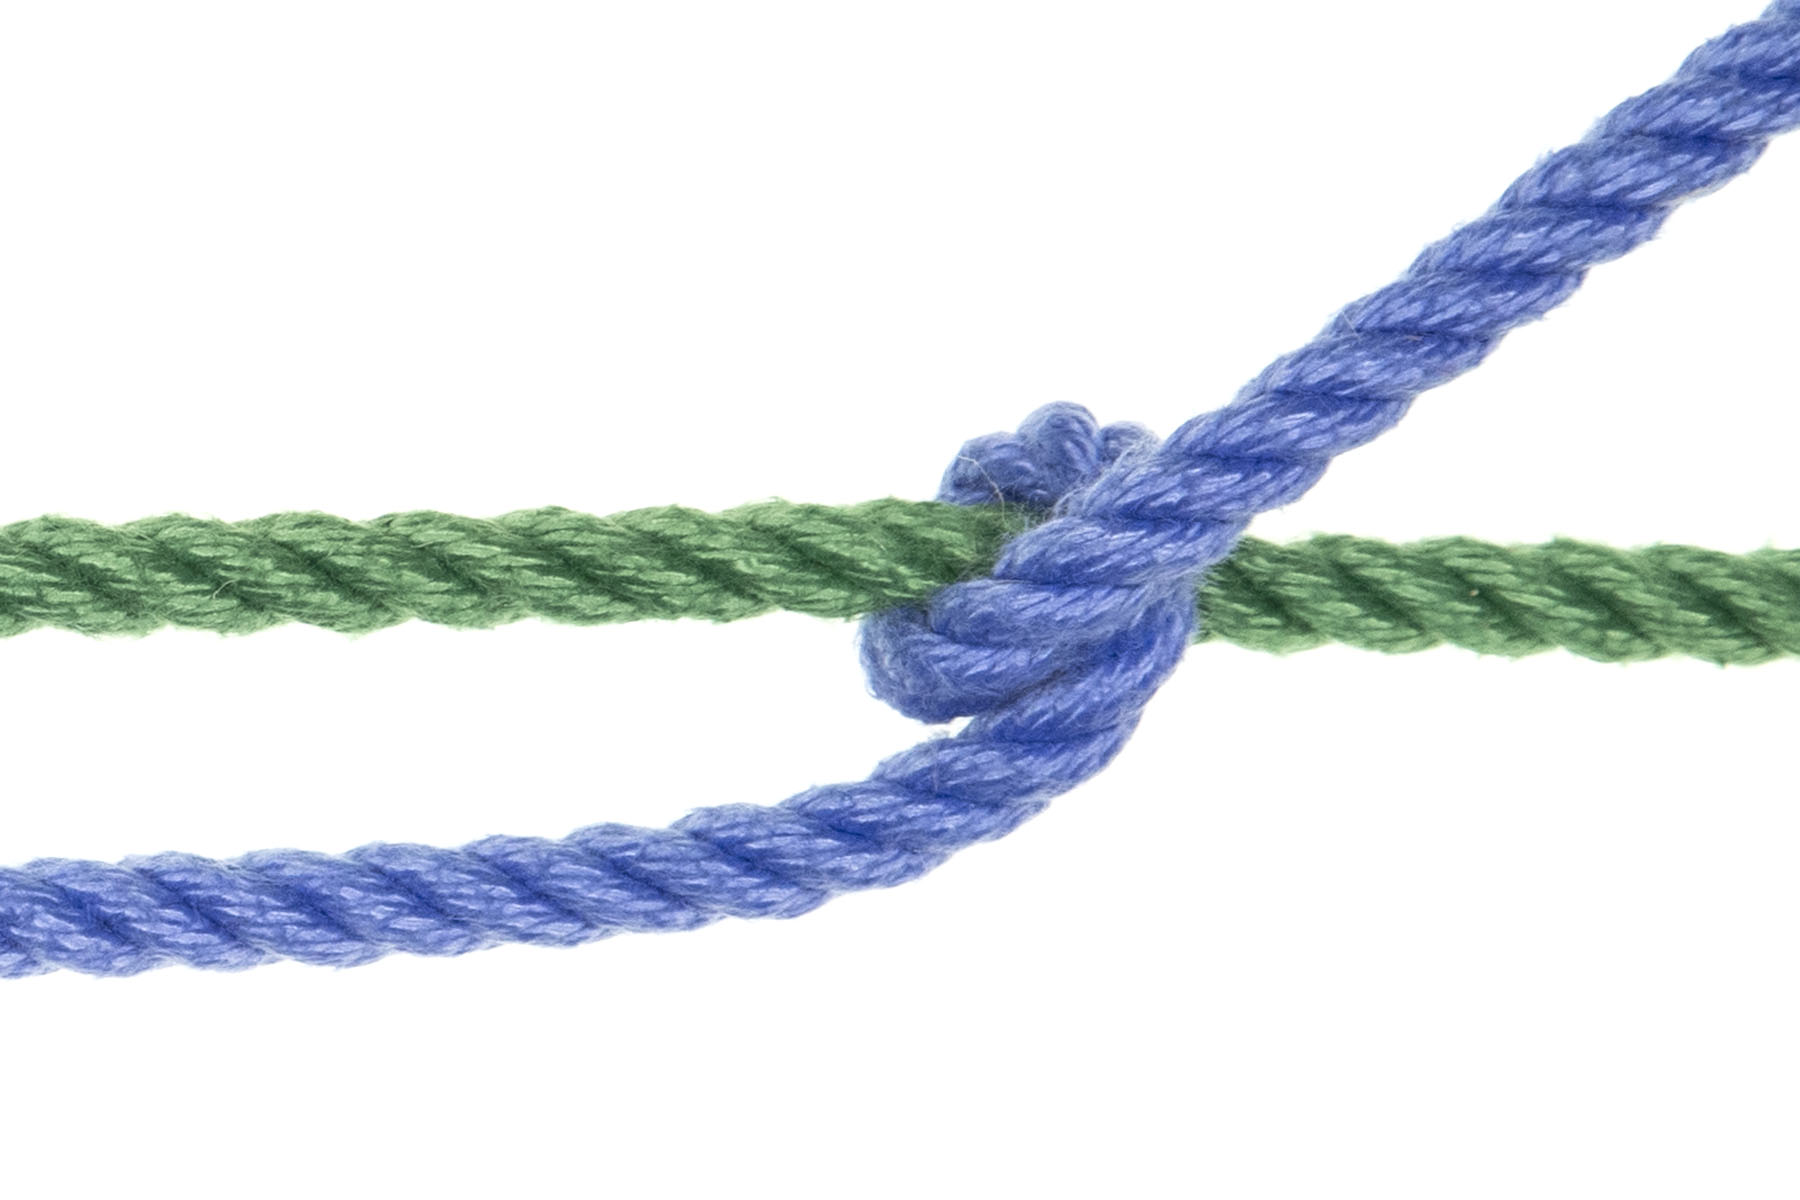 A single green rope crosses the frame horizontally. A blue rope enters from the left of the frame, just below the green rope. In the center of the frame, the blue rope makes a single spiral around the green rope, crossing over it, then under it, then over it again. The blue rope is pulled up and to the right, so it is wedged into the spiral.